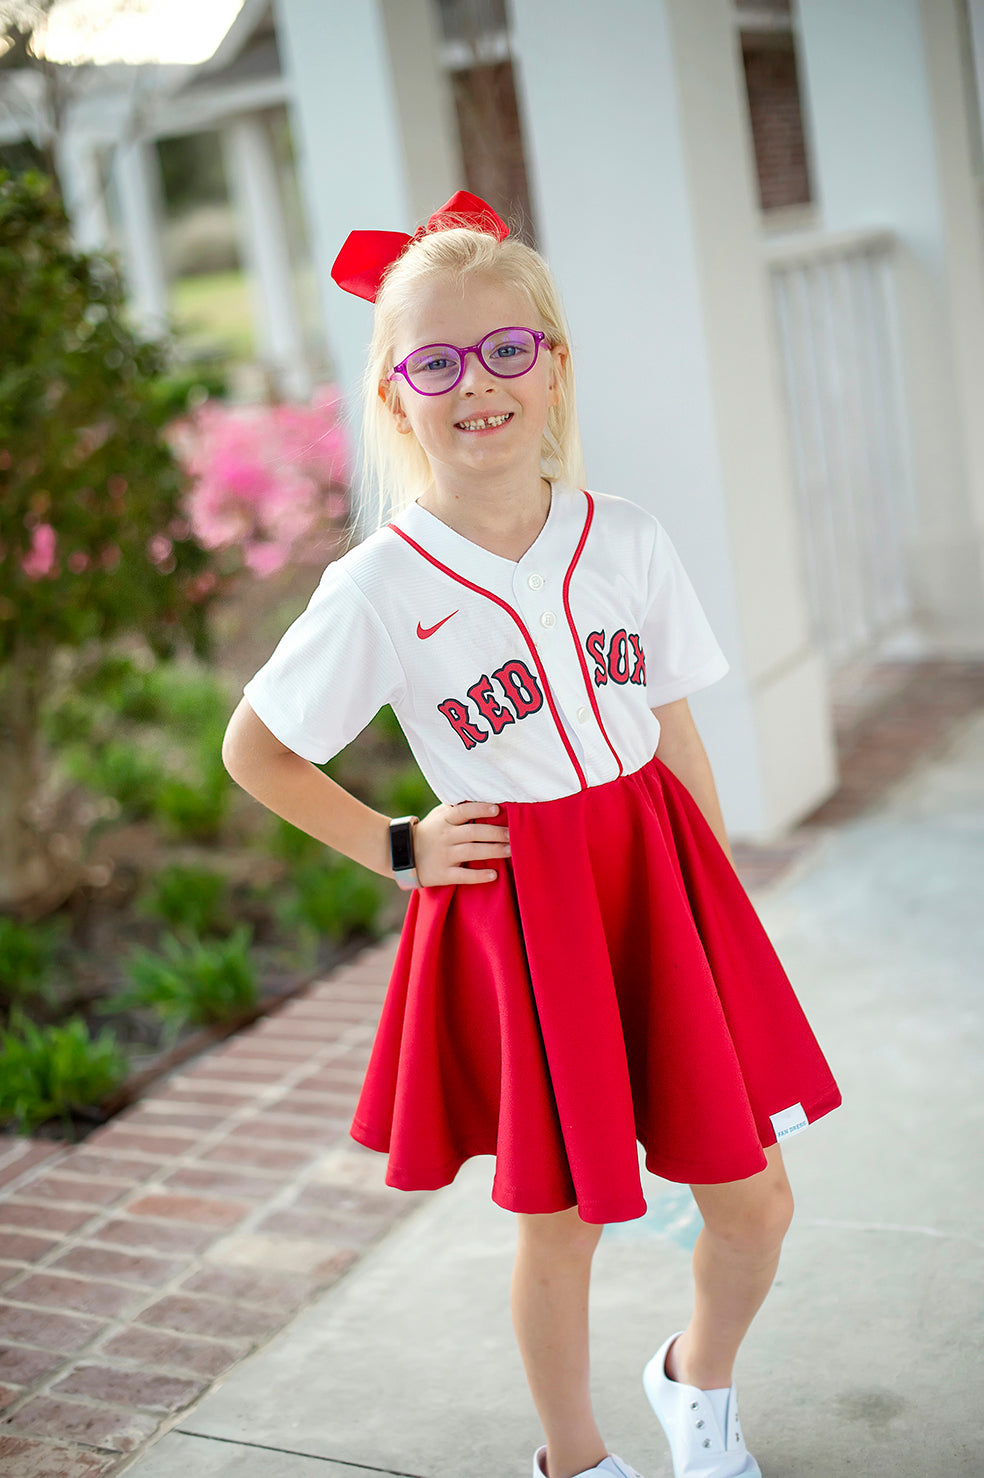 Red Sox kids jersey